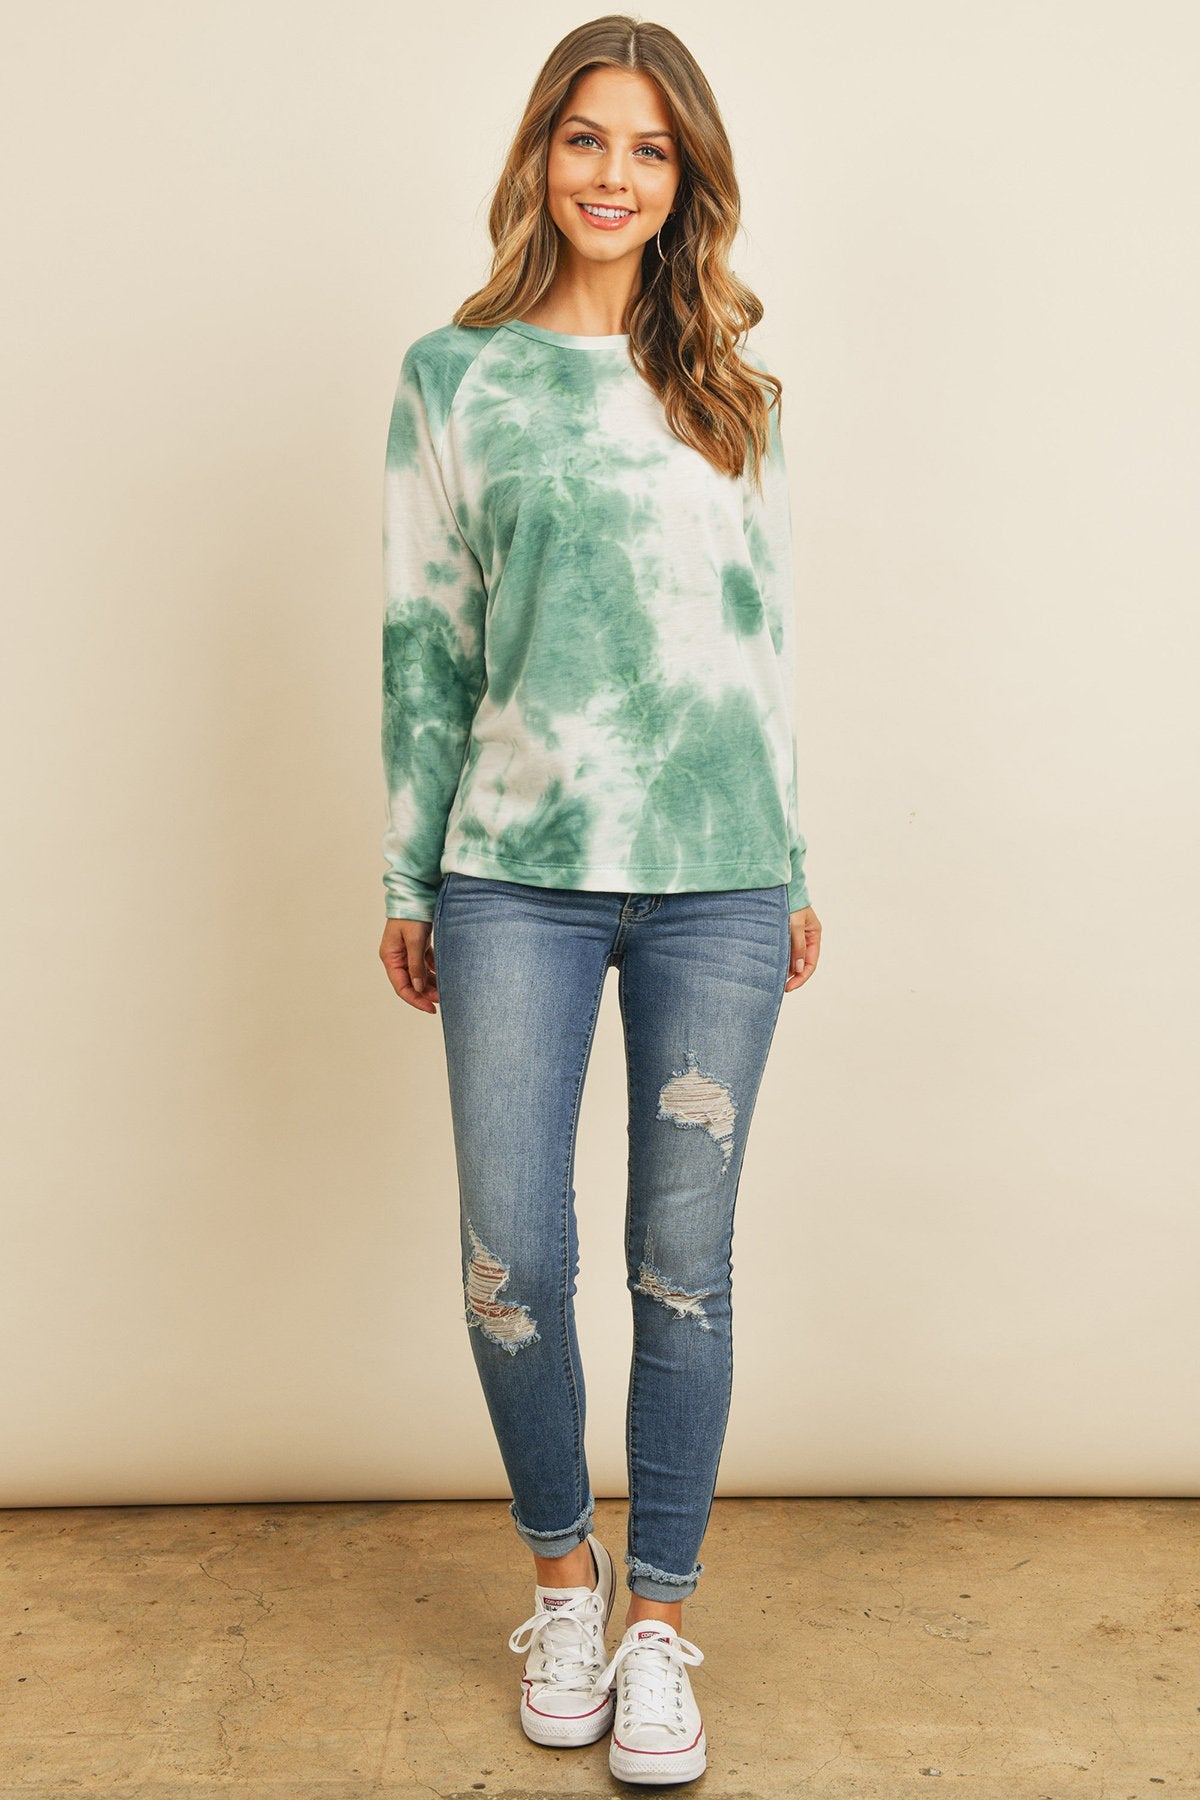 RM Tie Dye Round Neck Long Sleeved Top